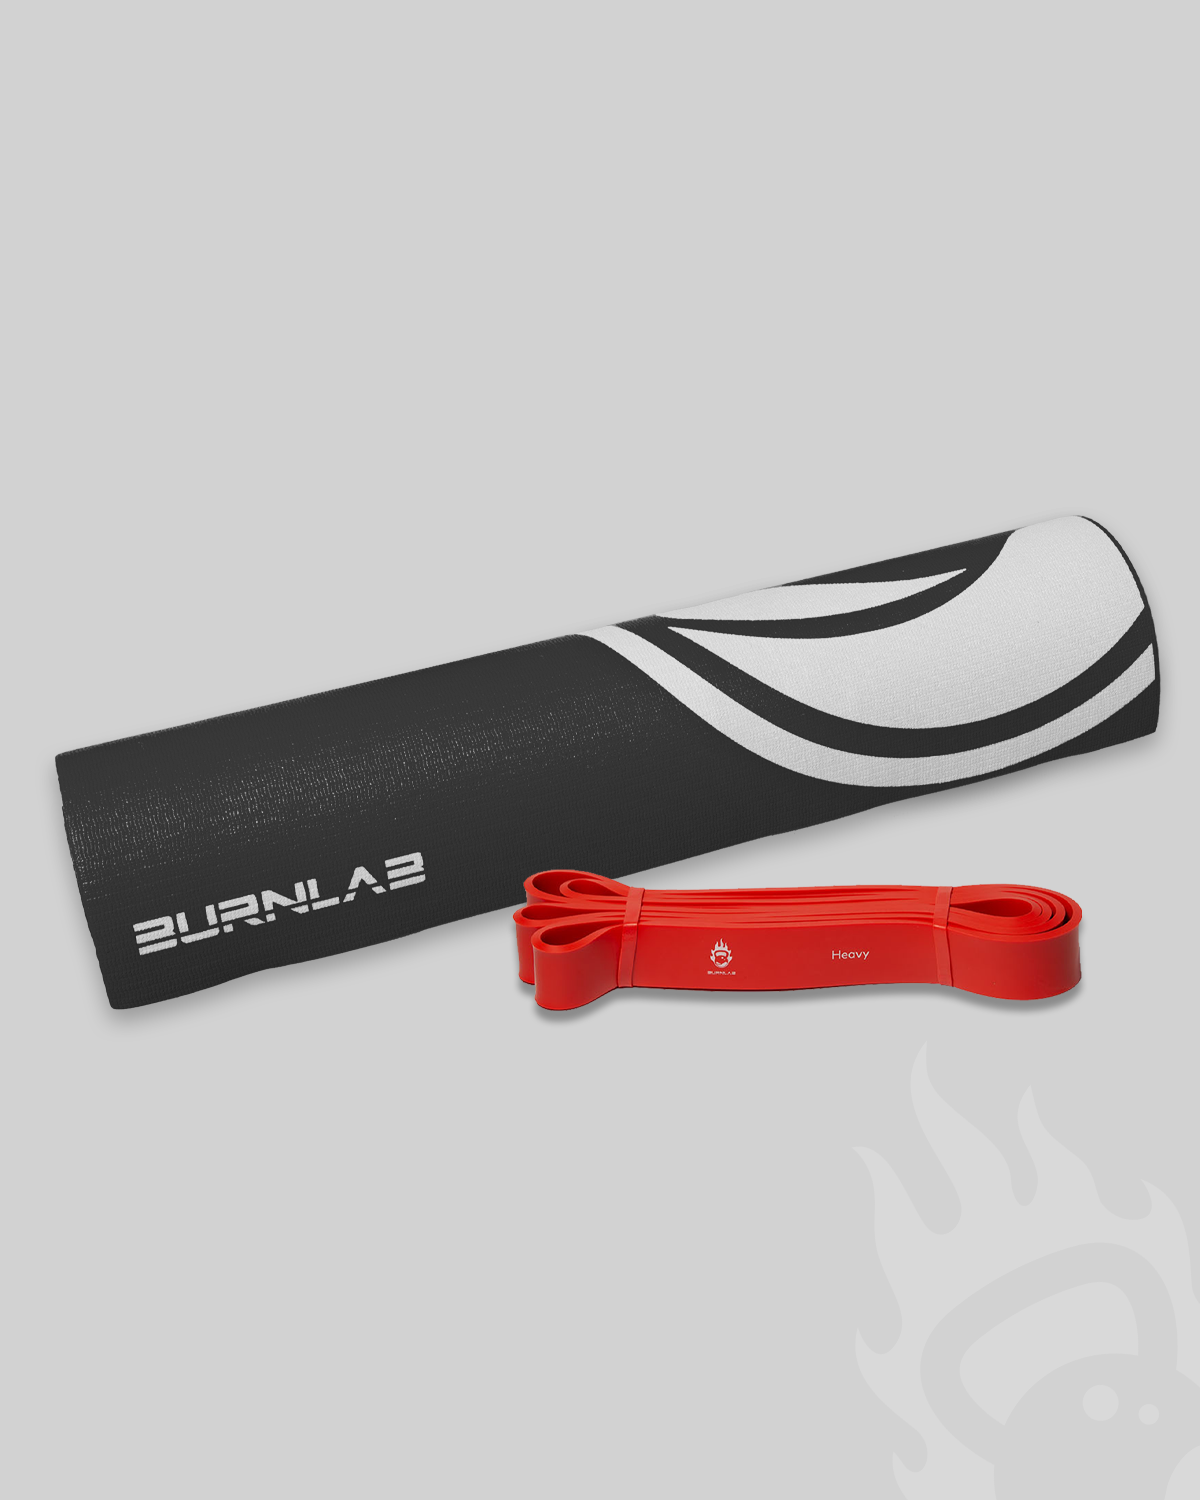 Get Durable Anti-Skid Washable Yoga Mats Online